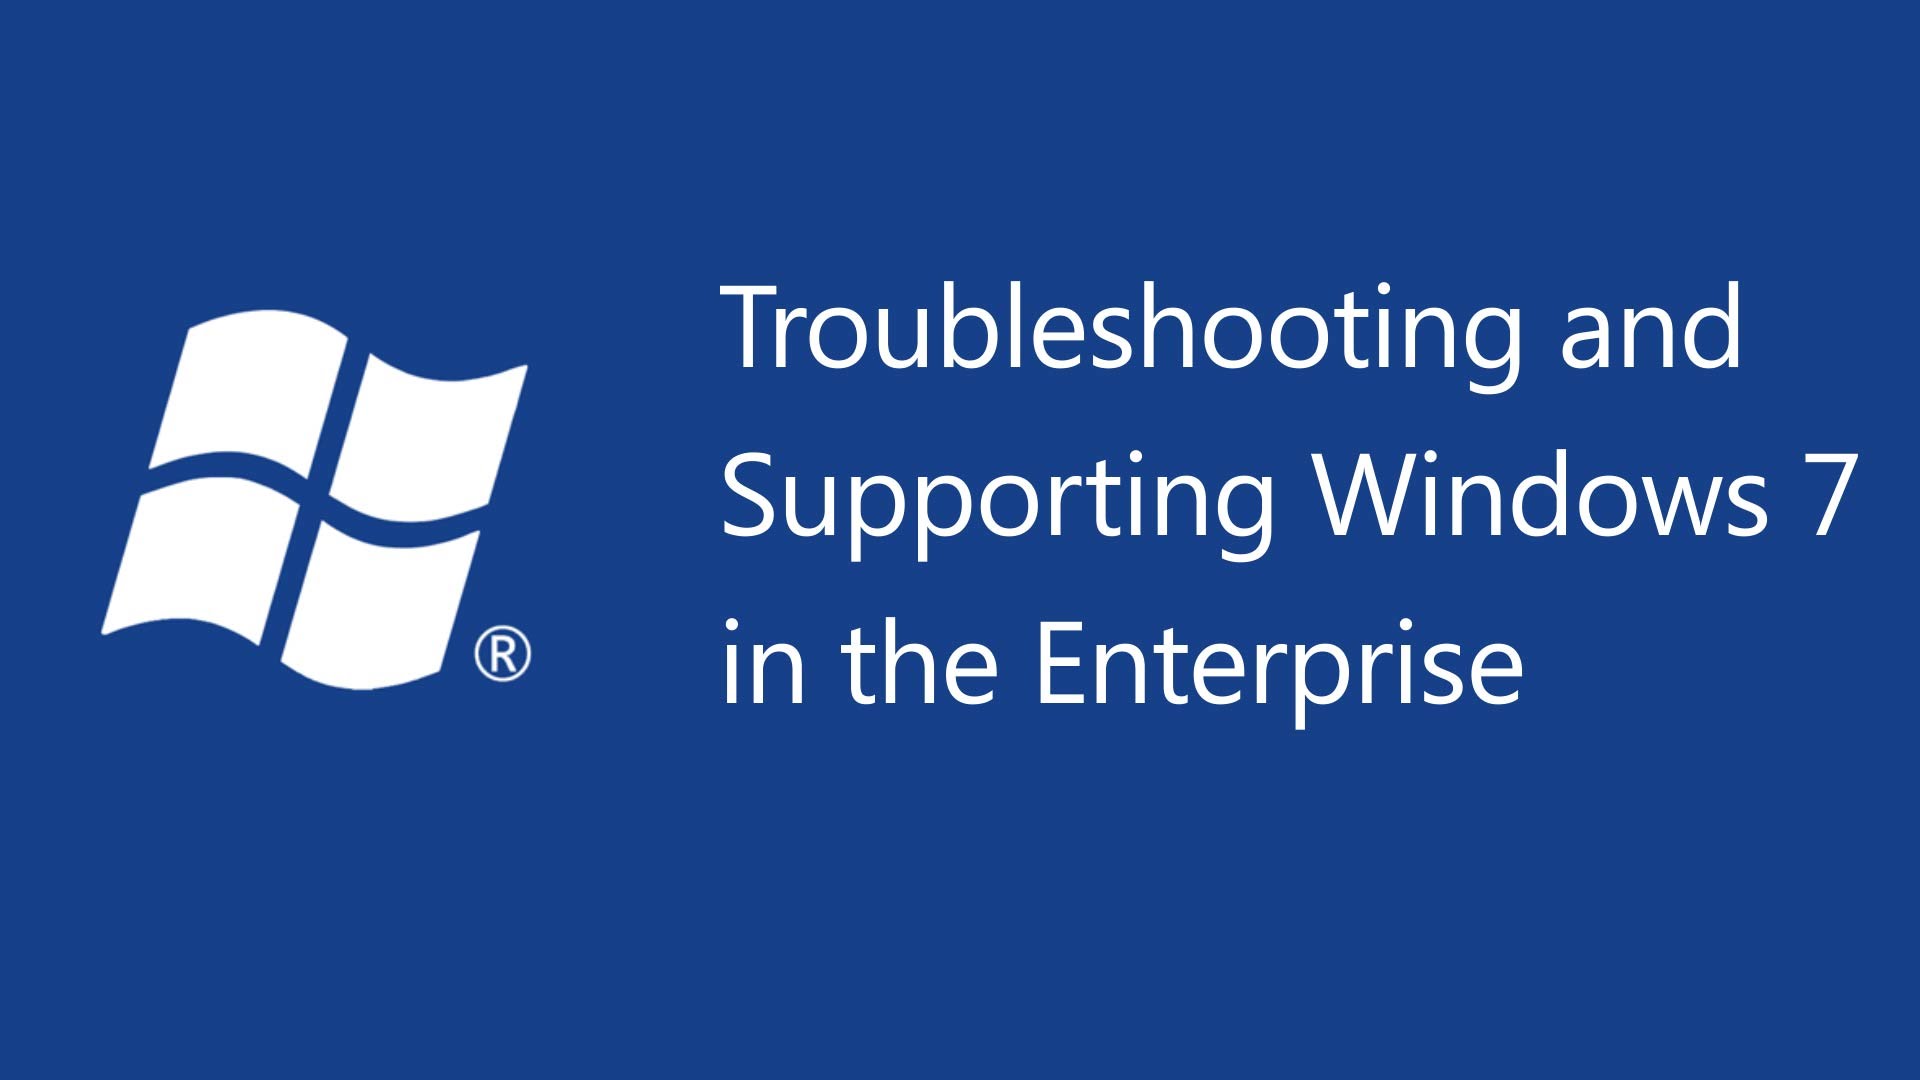 Troubleshooting and Supporting Windows 7 in the Enterprise